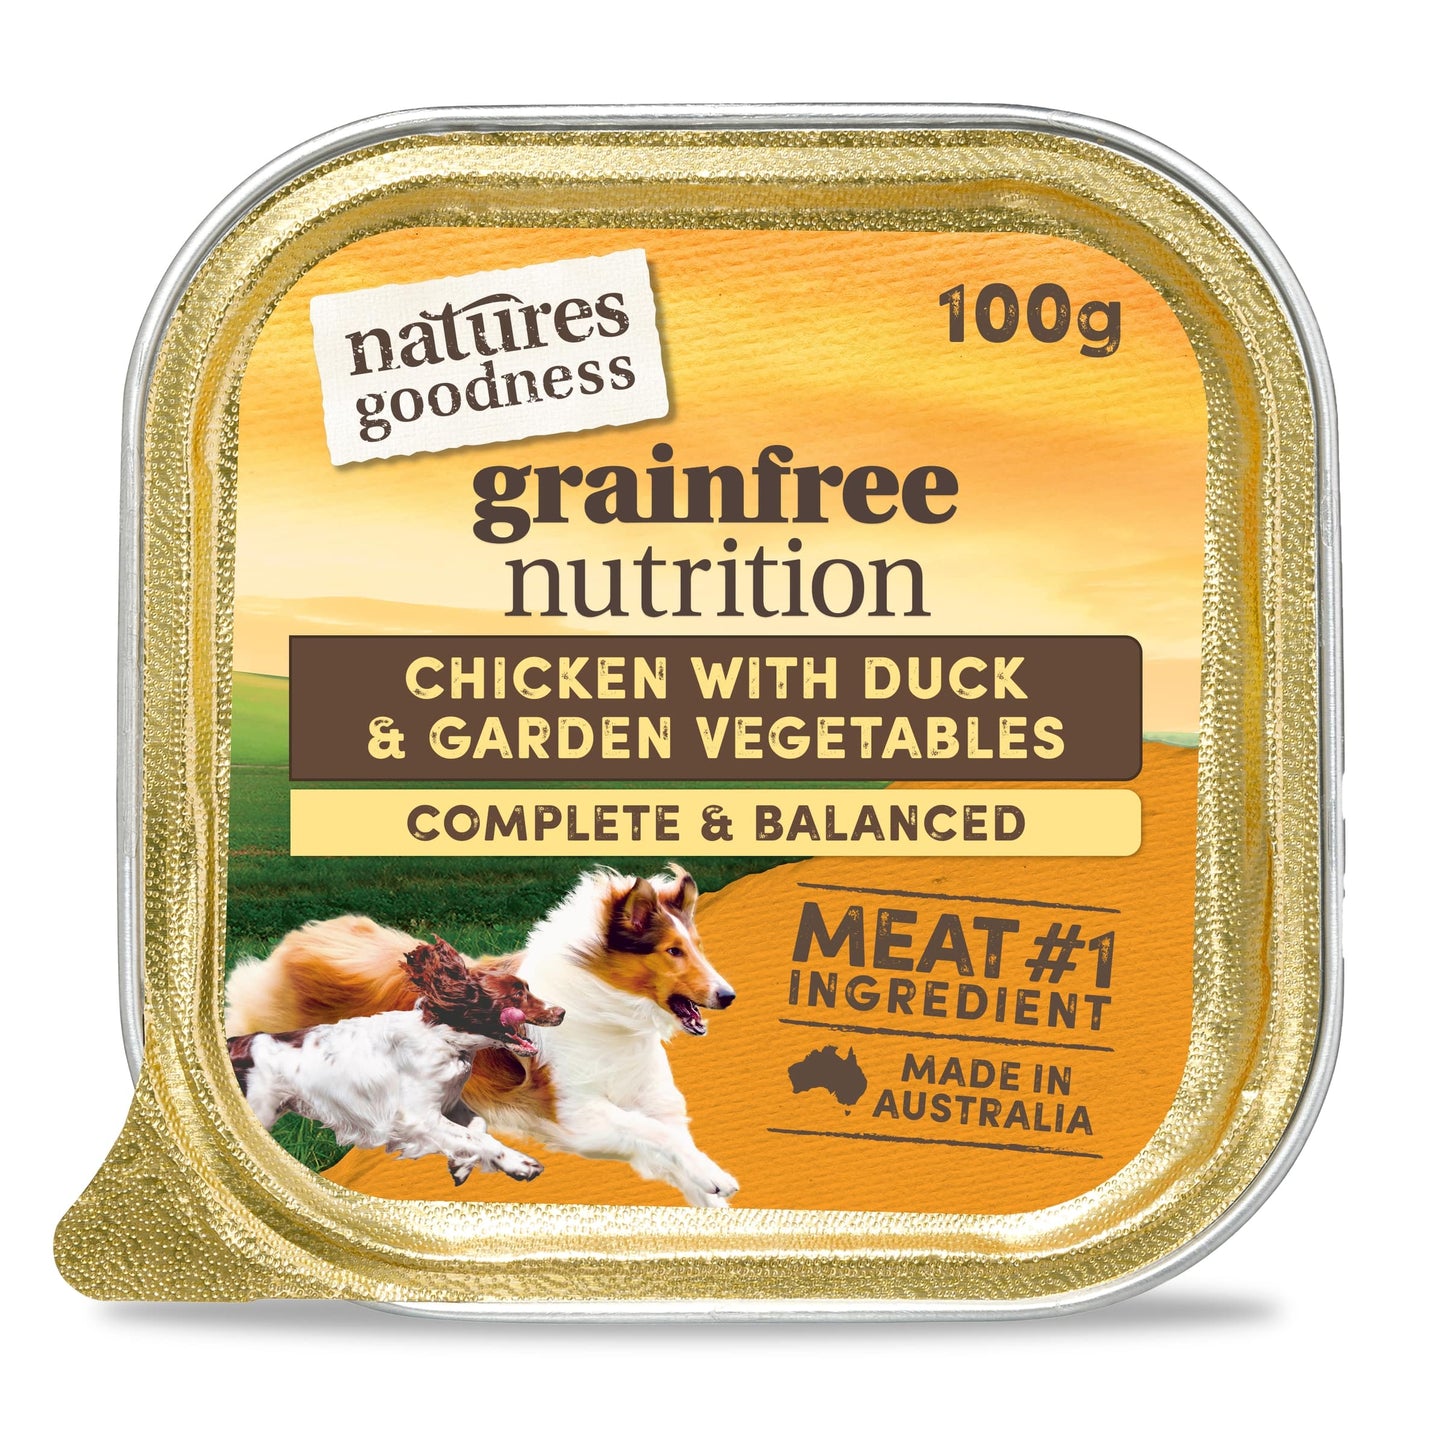 Natures Goodness Grain Free Dog Loaf Chicken with Duck and Vegetables 100g x 9